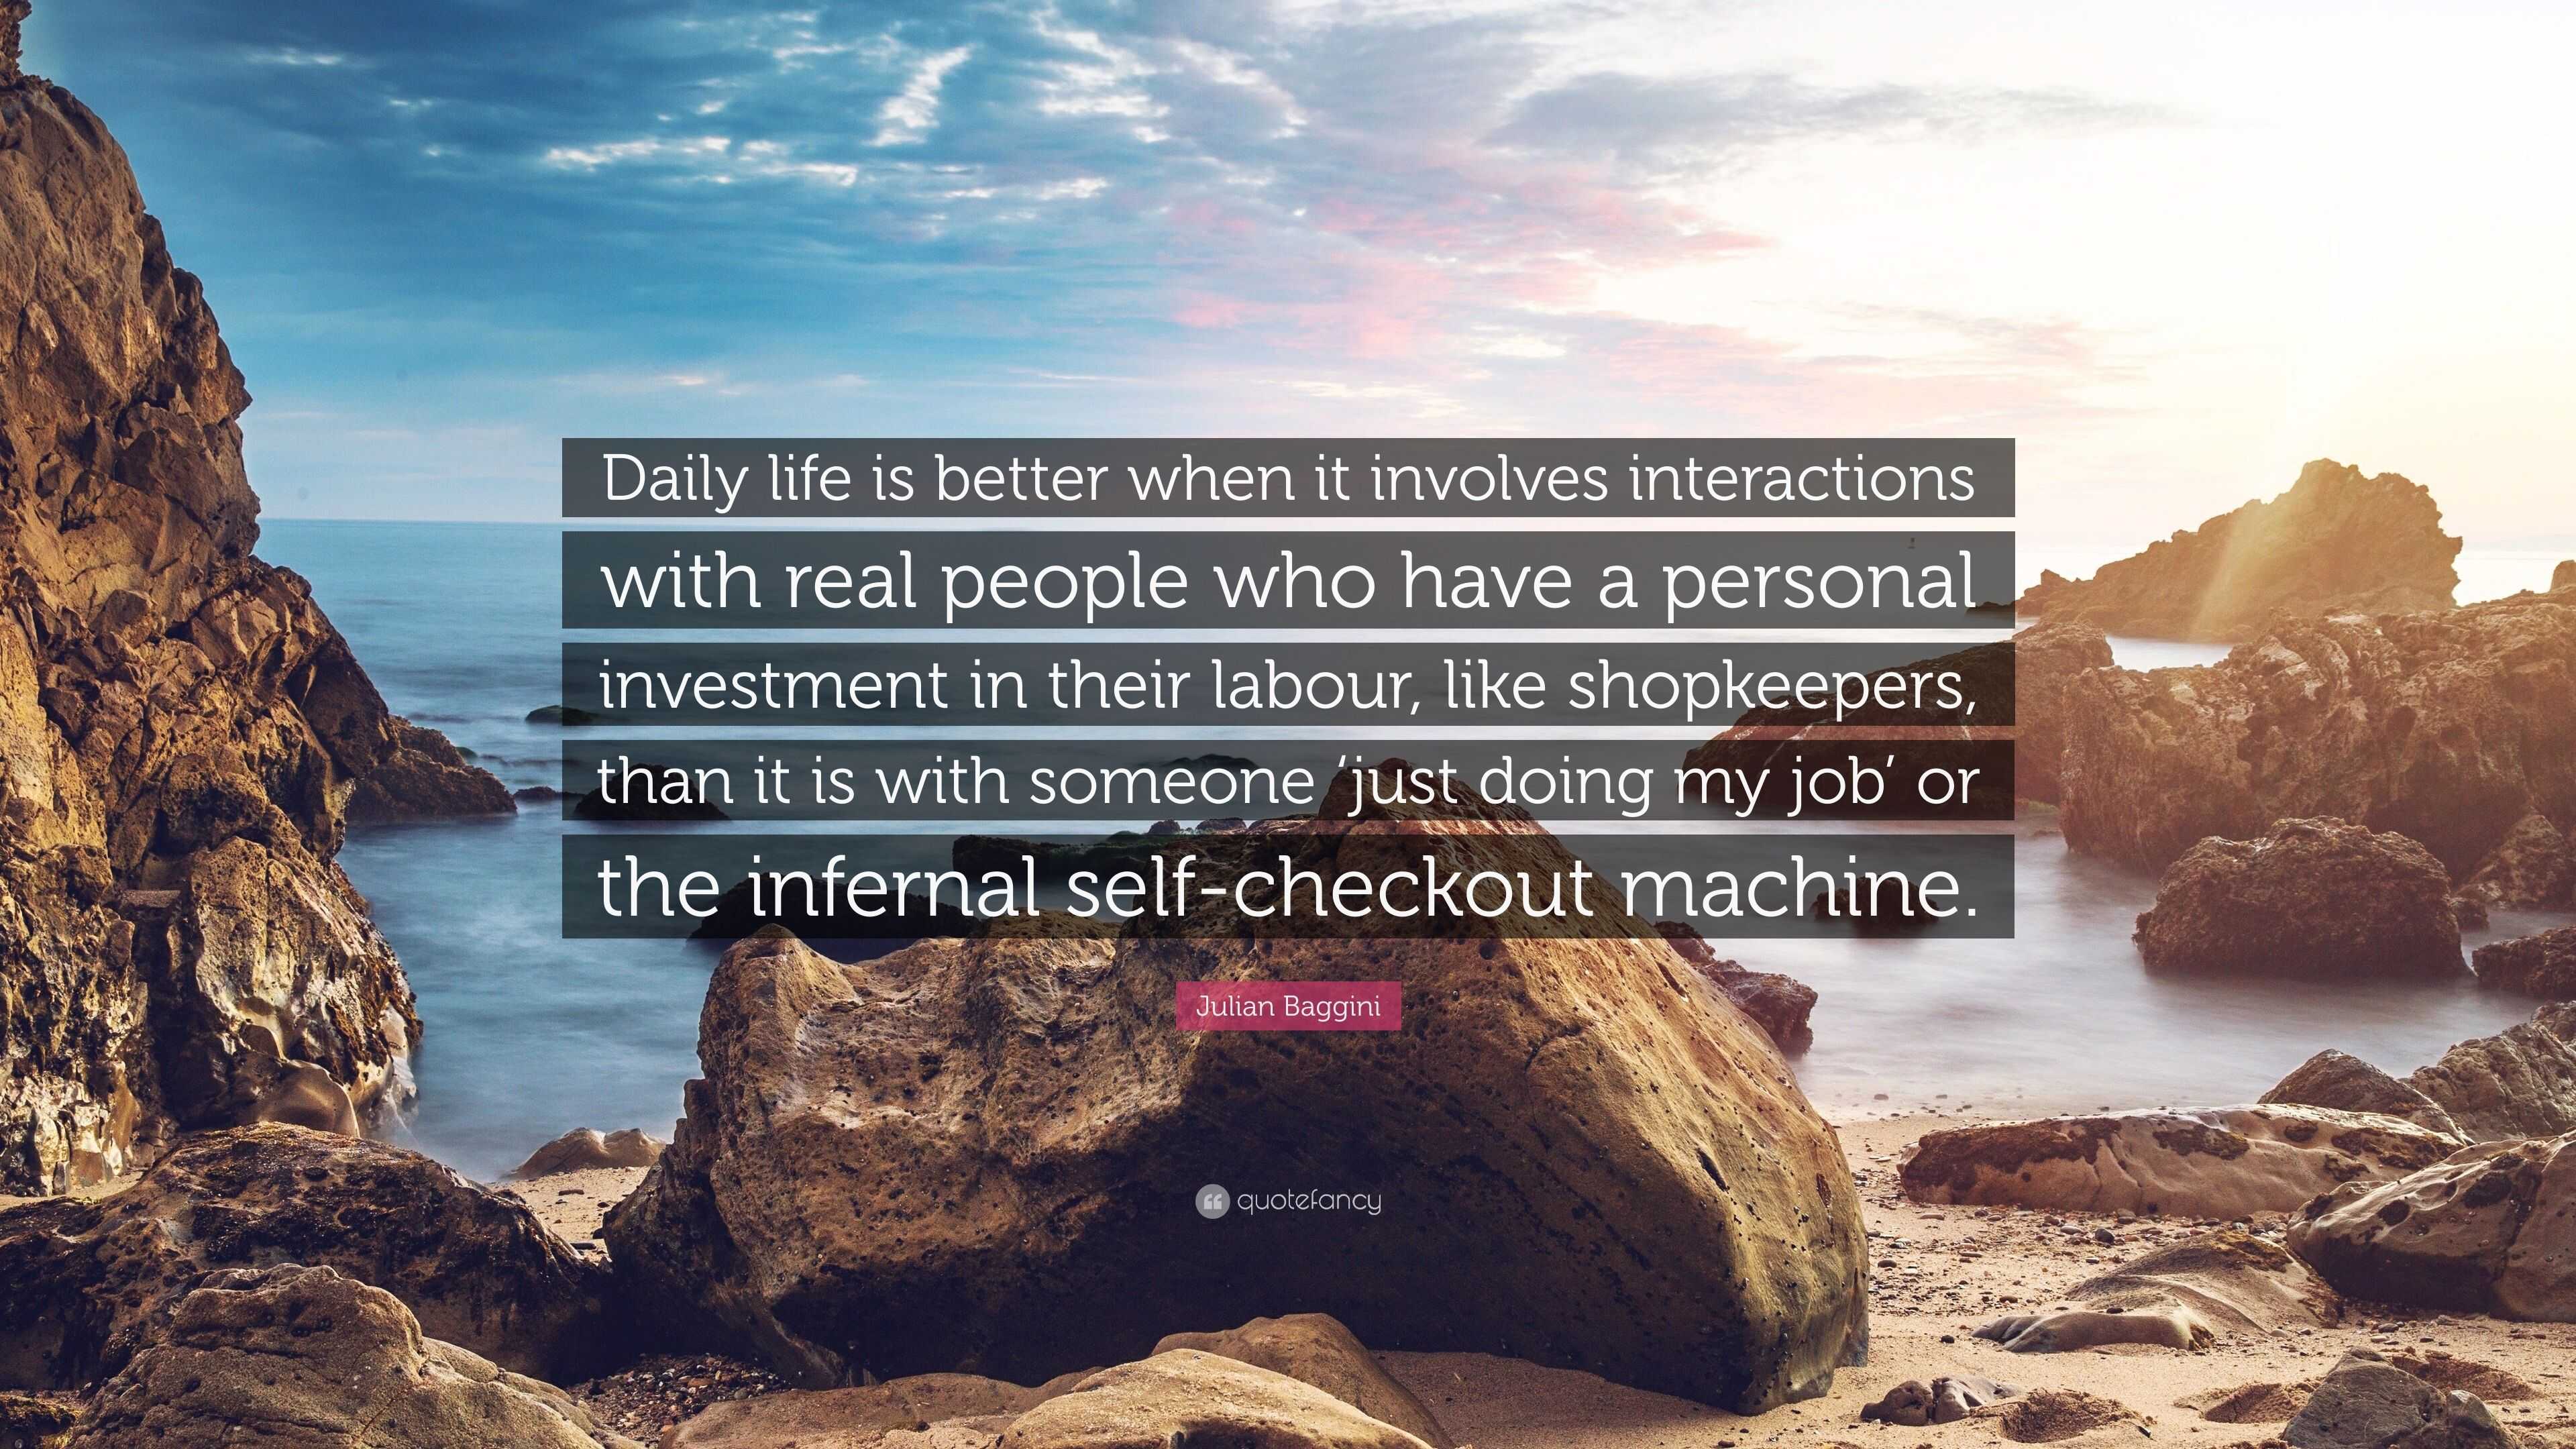 Julian Baggini Quote: “Daily life is better when it involves interactions  with real people who have a personal investment in their labour, like”